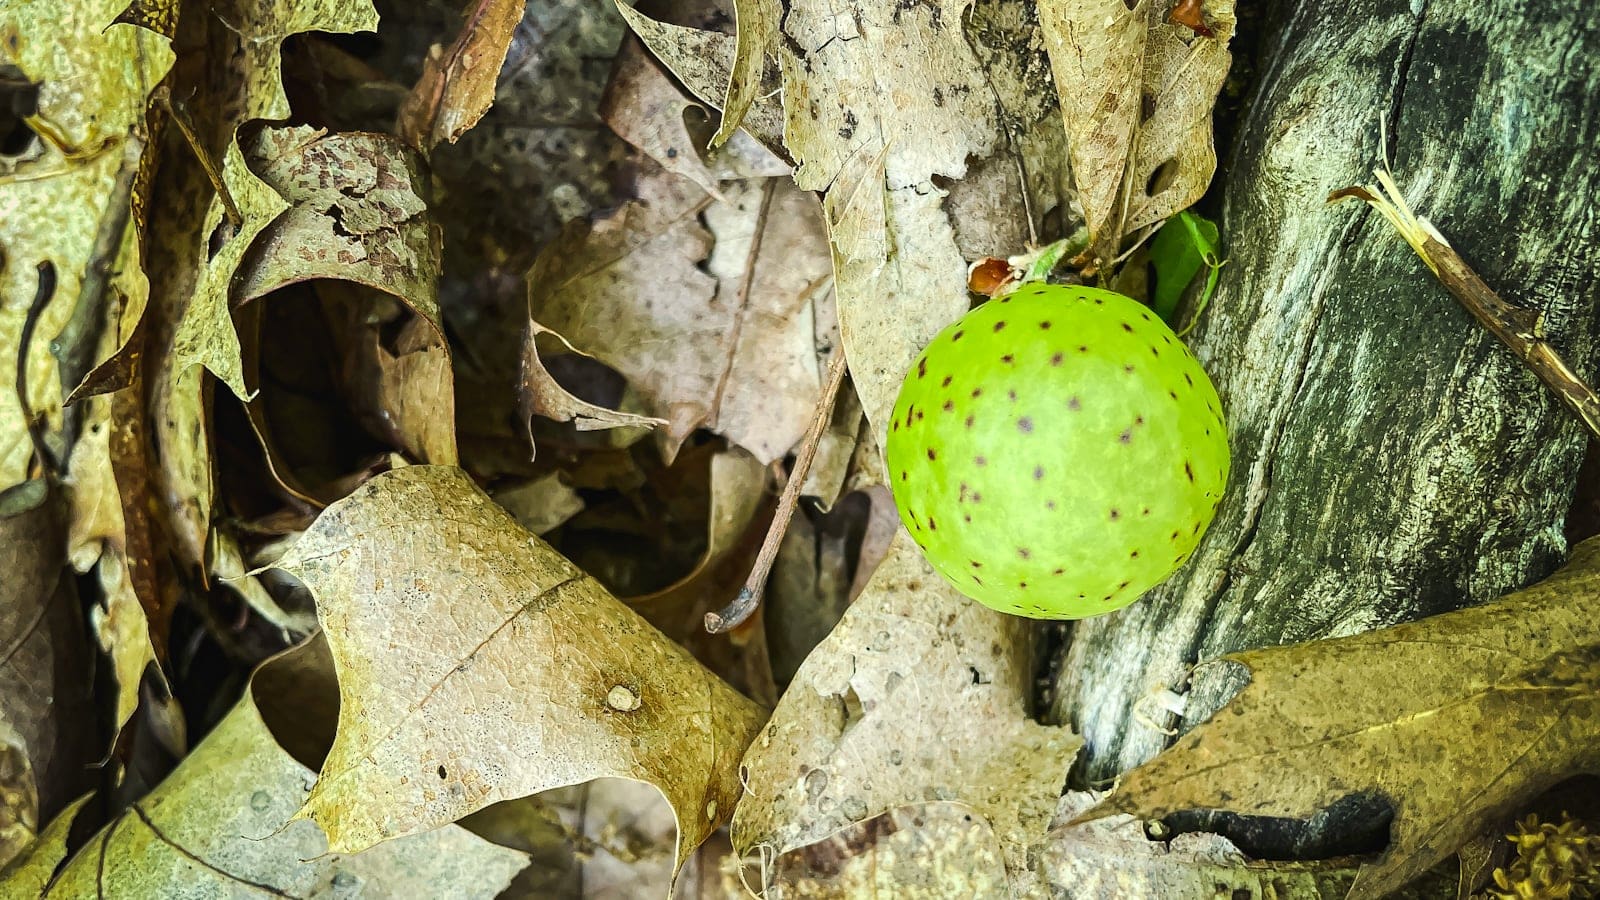 oak apple gall made by a gall wasp